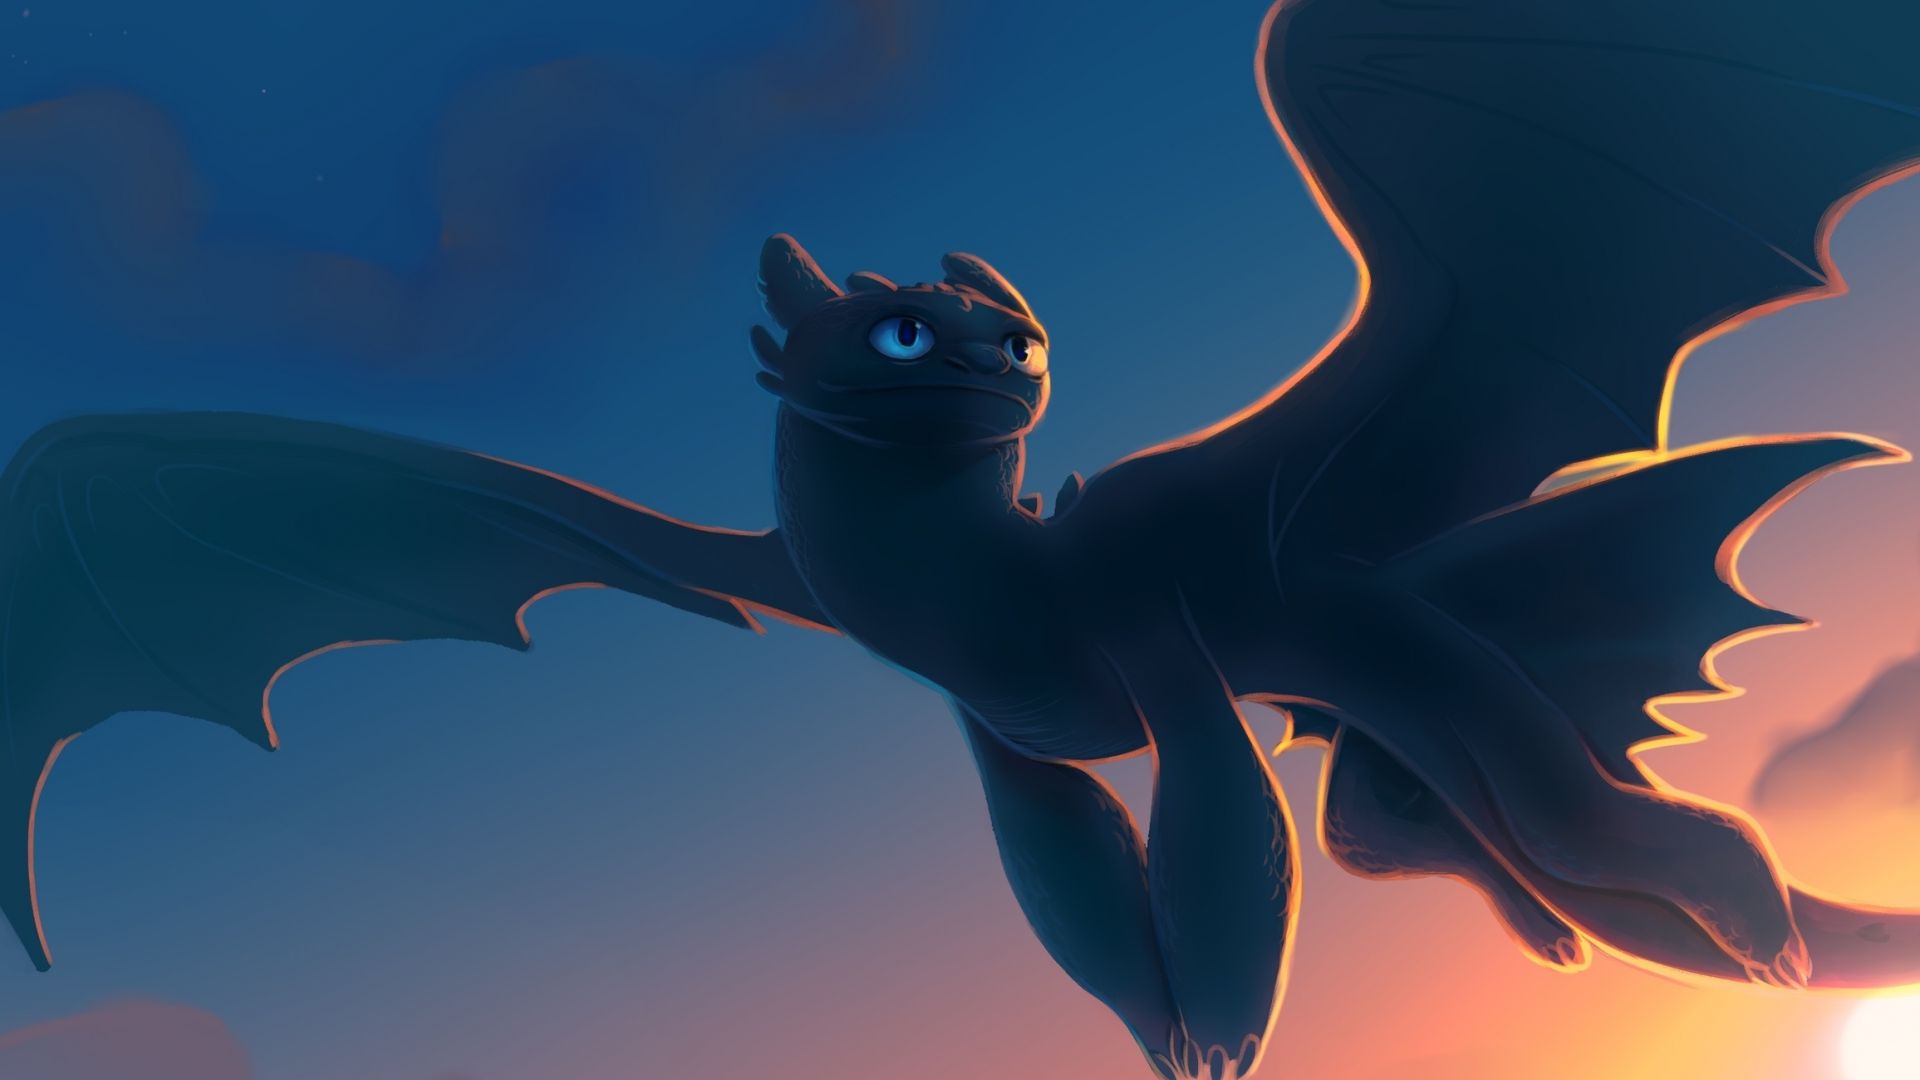 Desktop wallpaper toothless, movie, how to train your dragon, artwork, HD image, picture, background, 33fb65